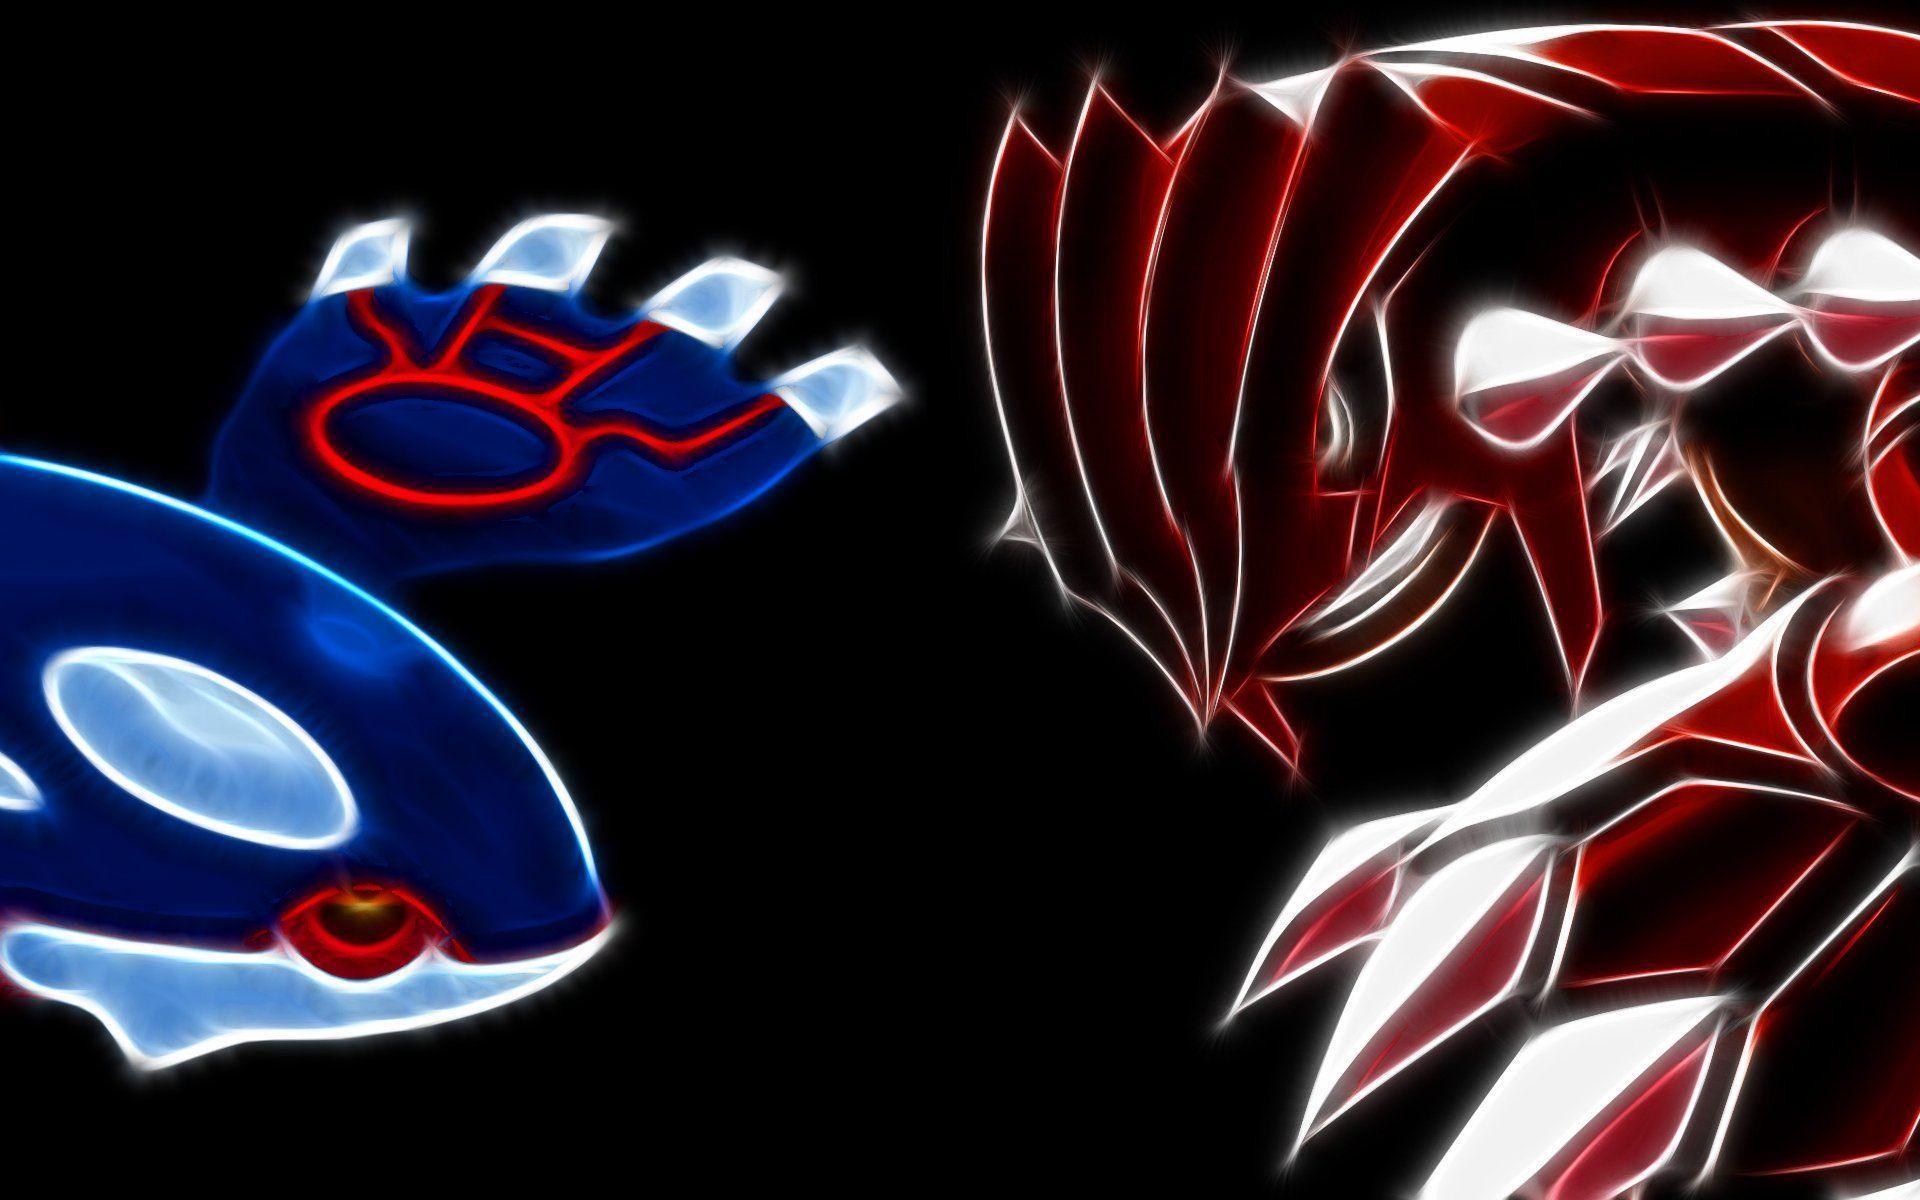 Kyogre (Pokémon) HD Wallpaper and Background Image